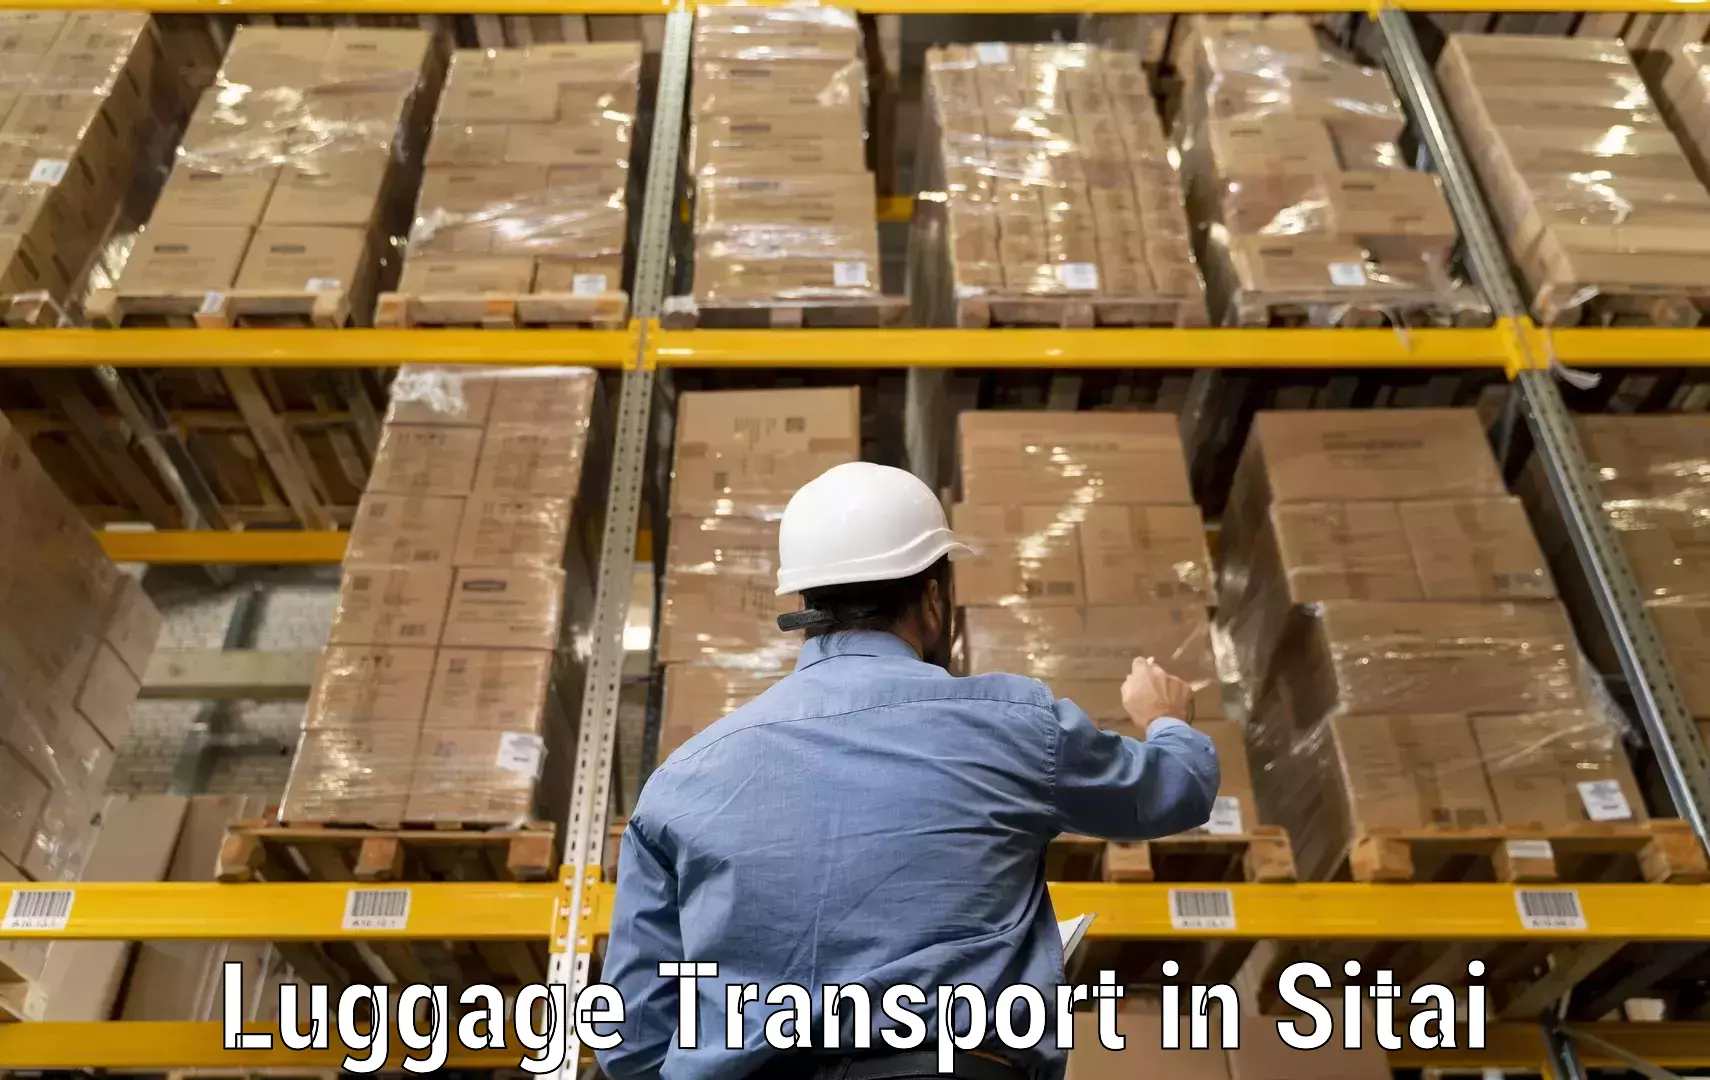 Baggage transport technology in Sitai